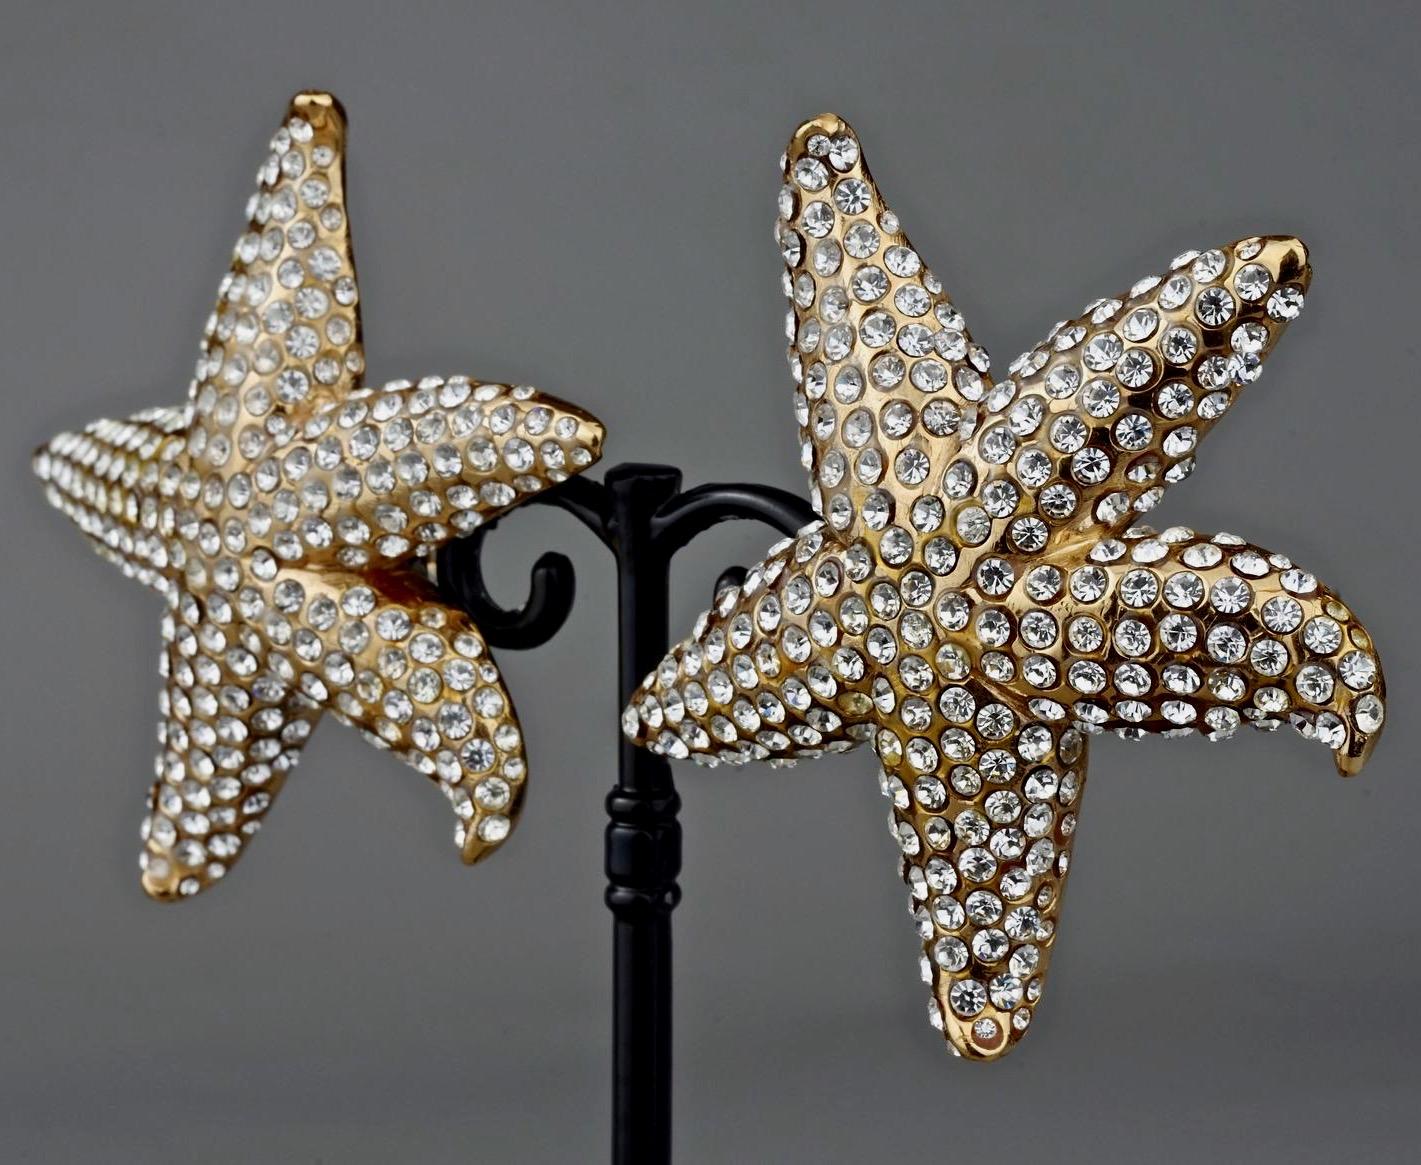 Vintage Lanvin Paris Star Fish Rhinestone Earrings In Excellent Condition For Sale In Kingersheim, Alsace